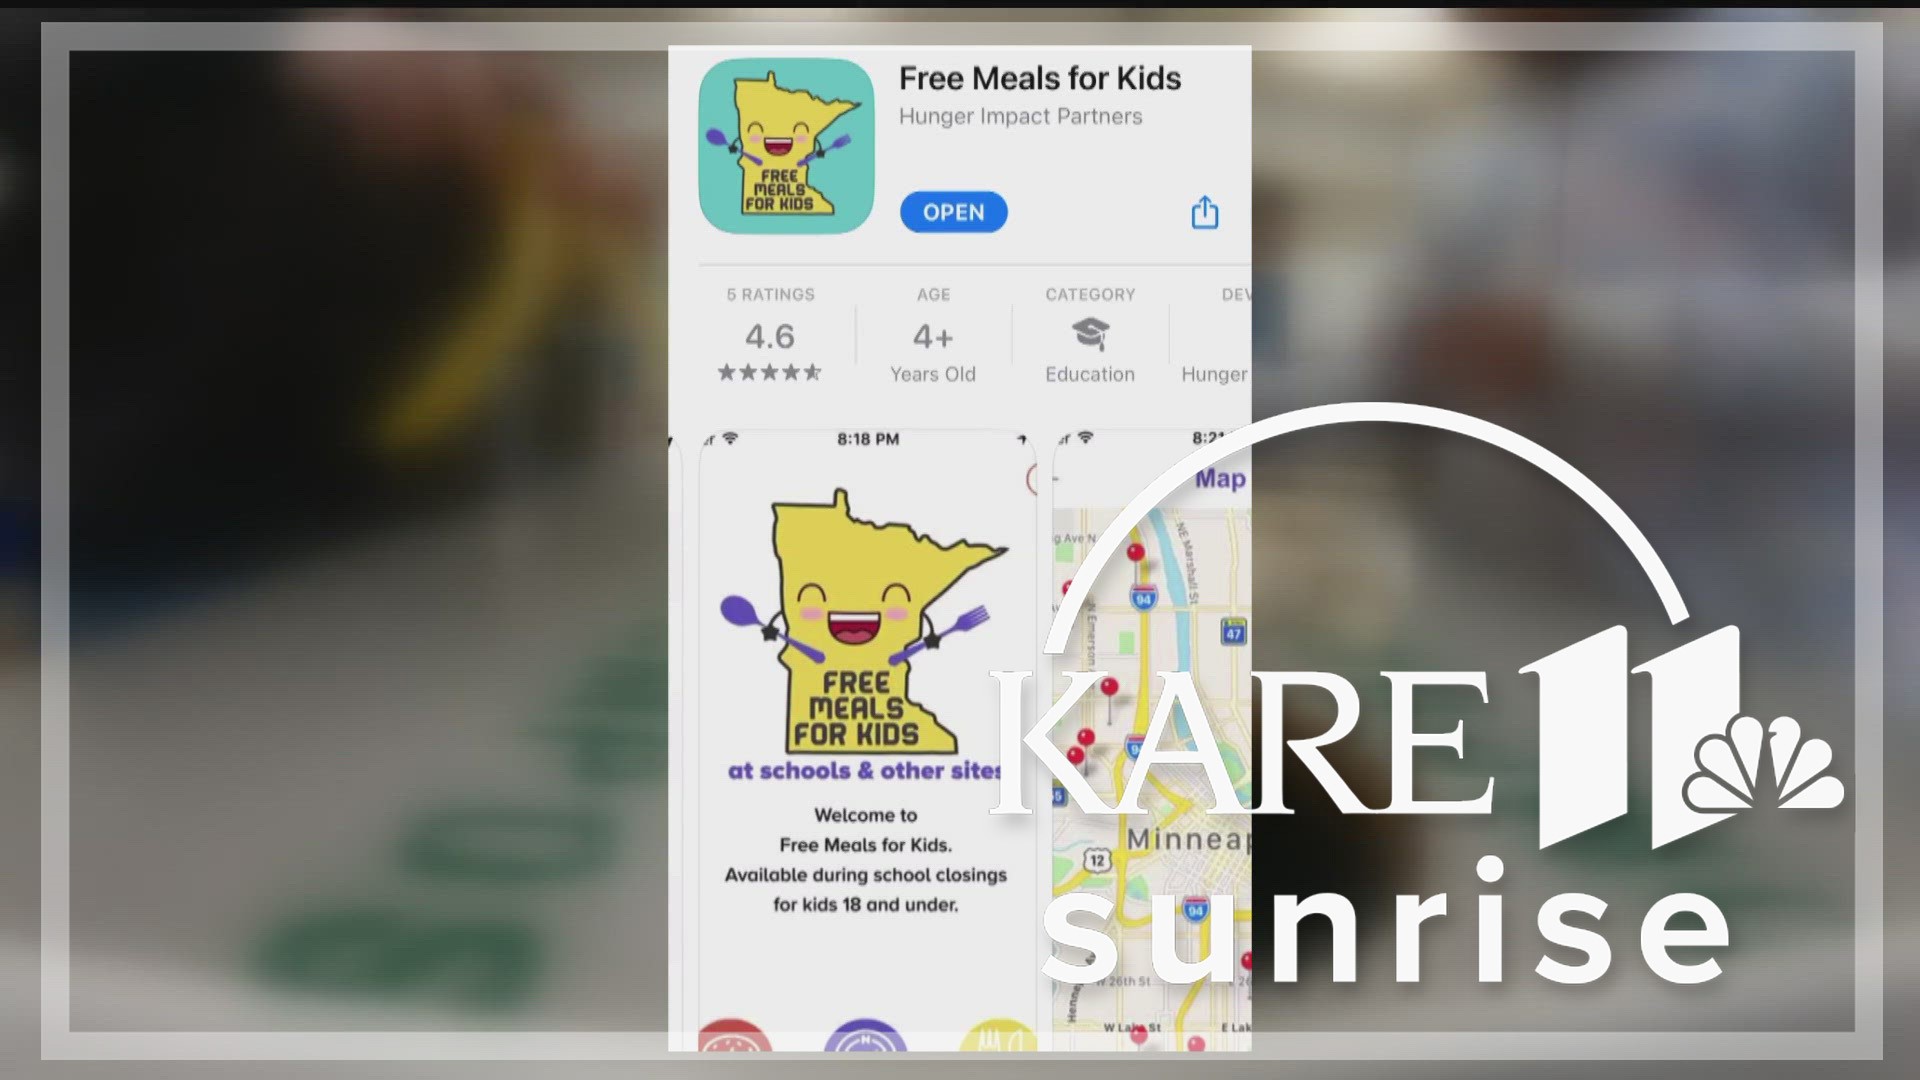 Some kids don't have easy access to food during the summer months, but a local non-profit is saying "wait... there's an app for that!"